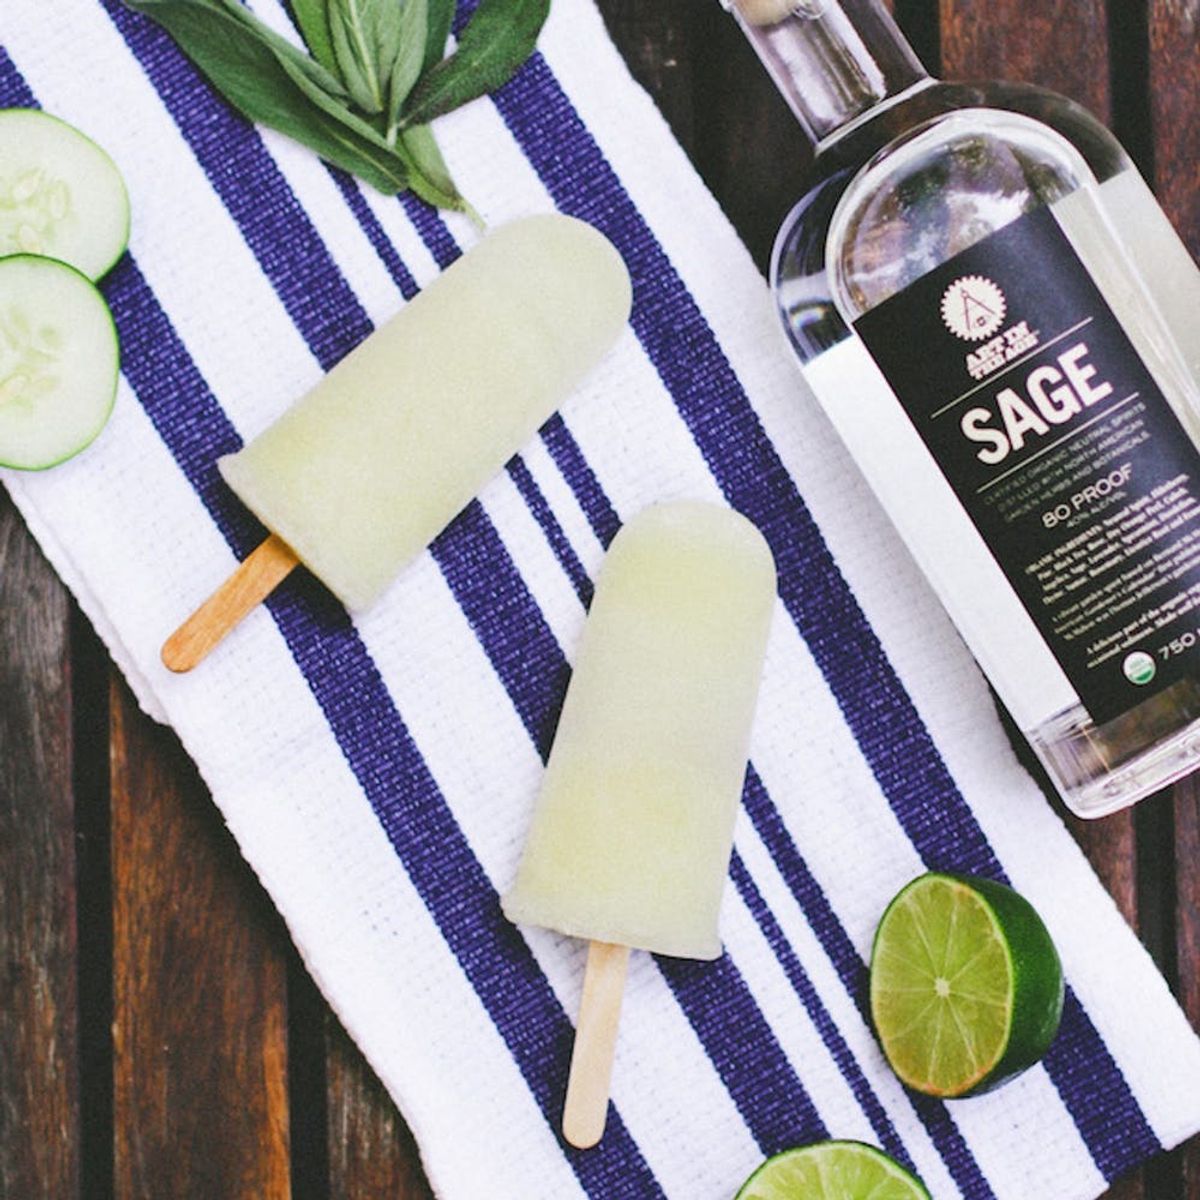 How to Make DIY Boozy Popsicles